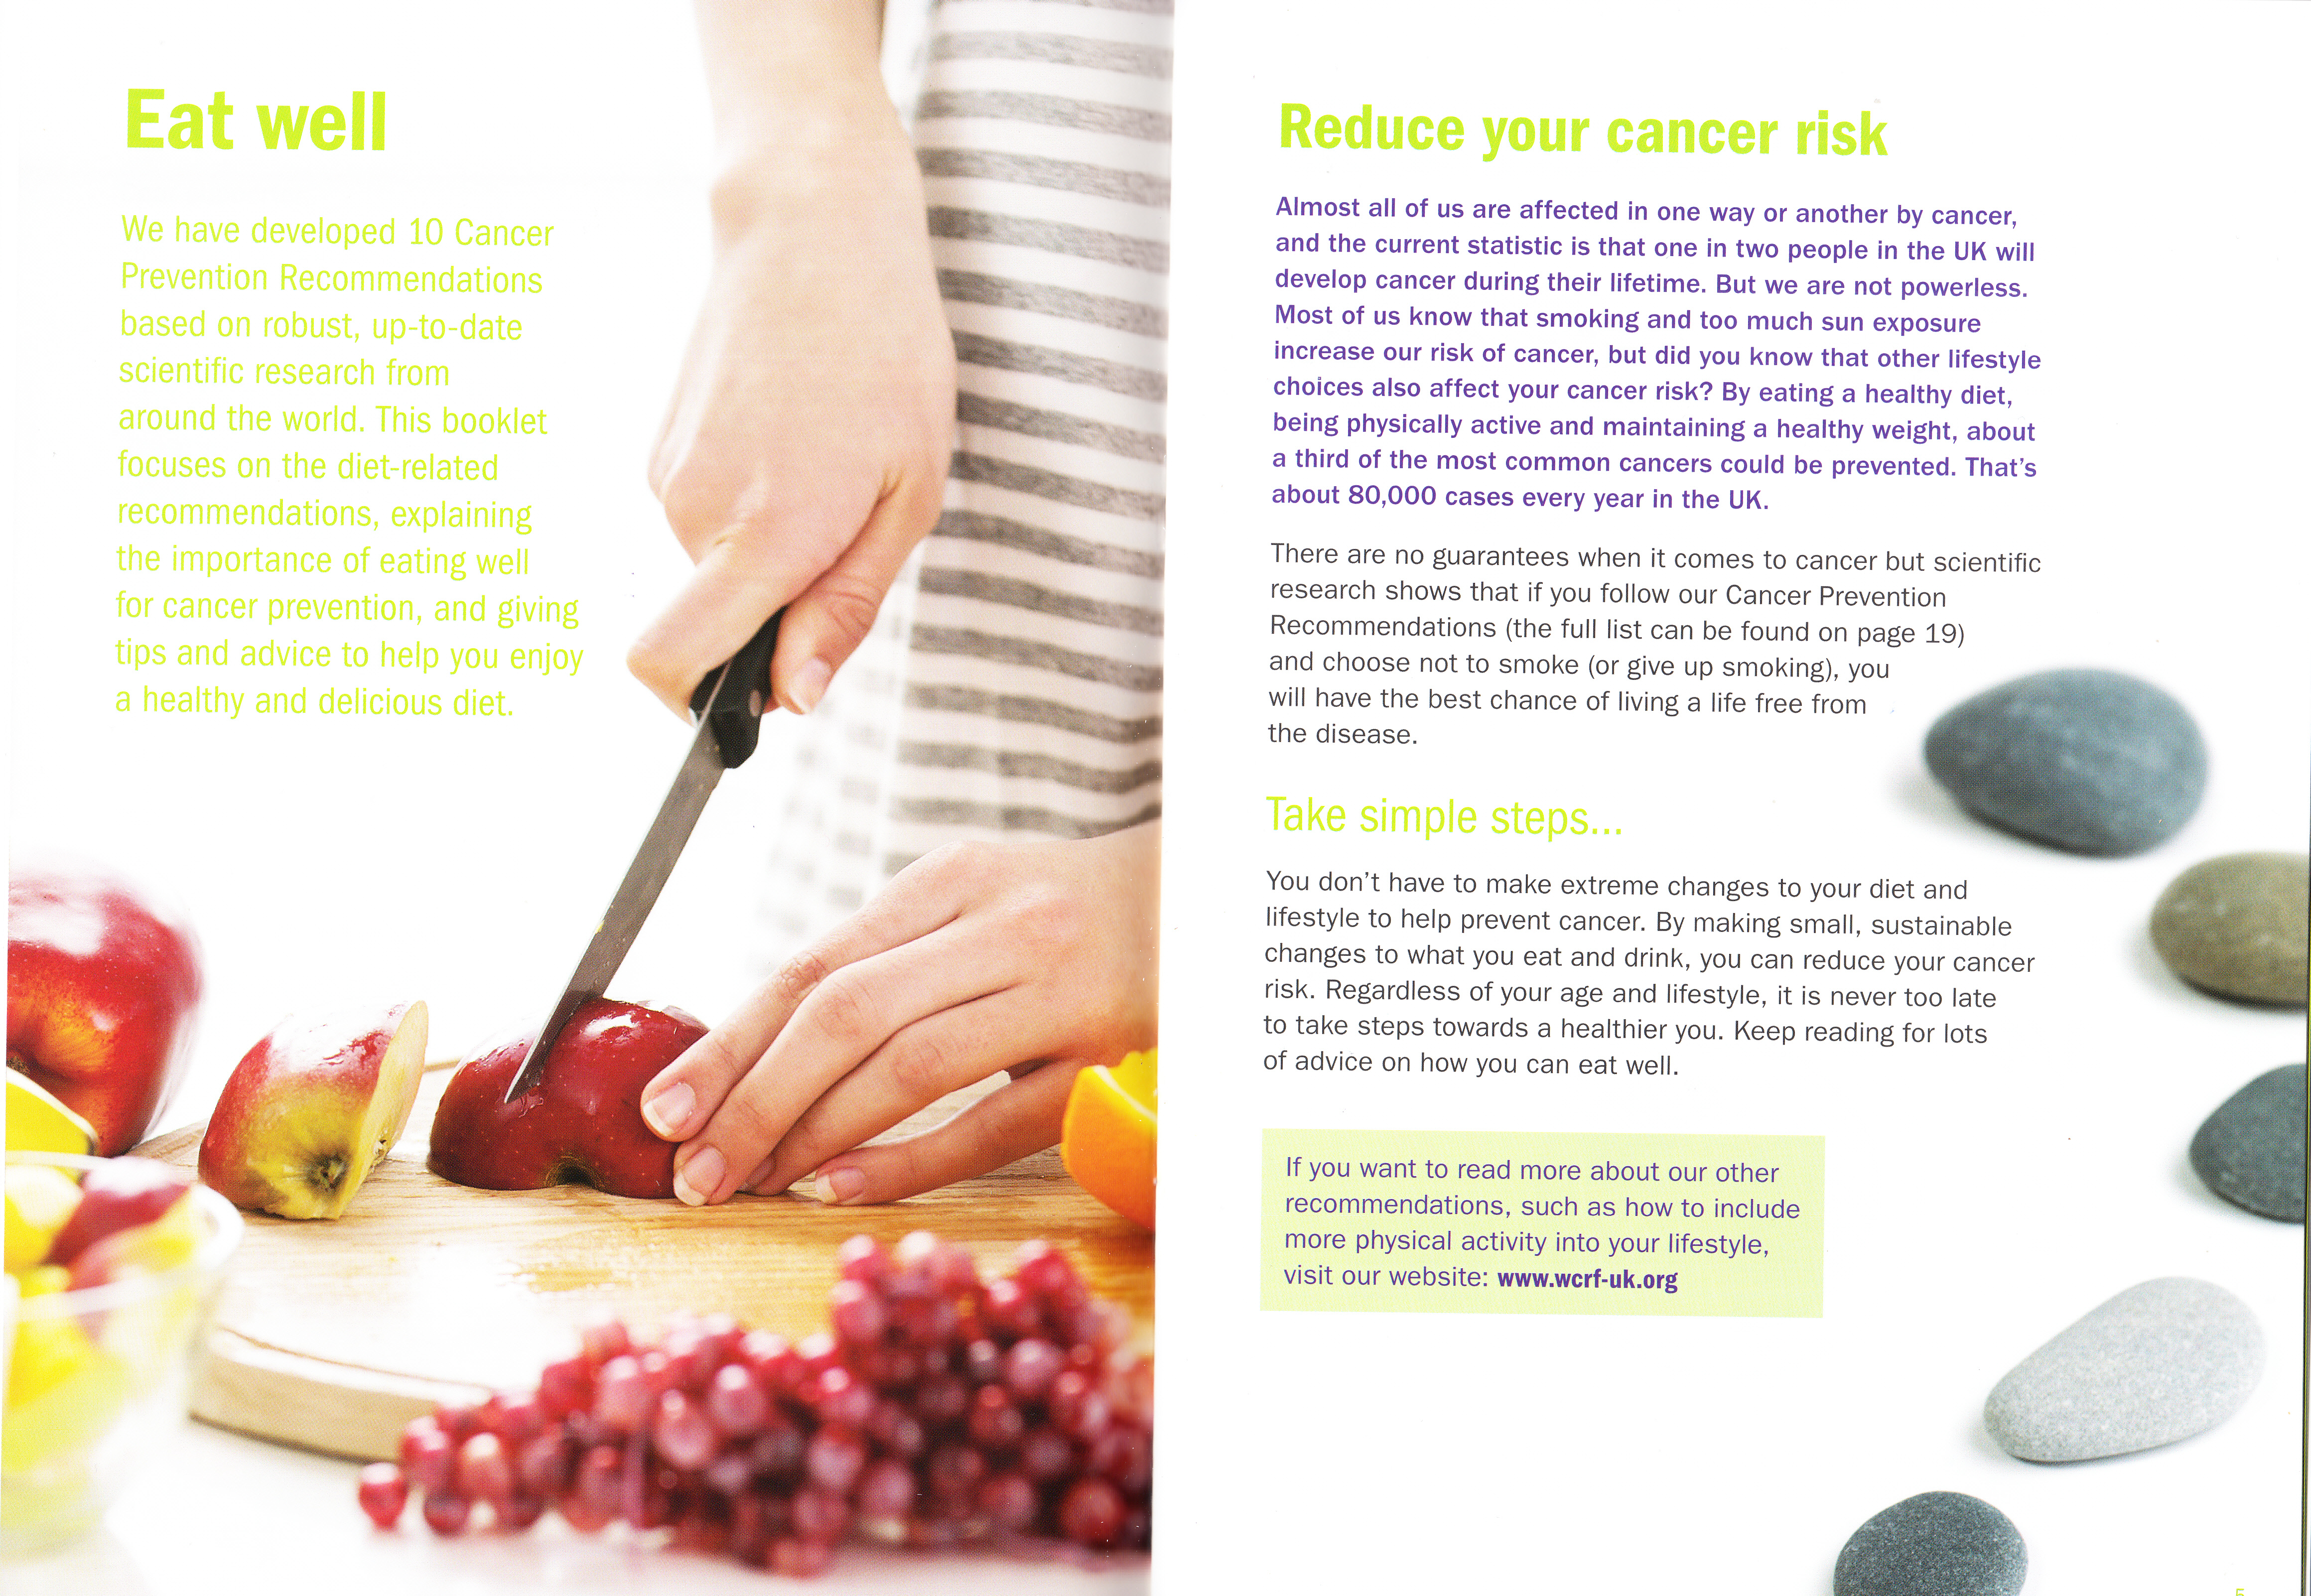 Eat well reduce your cancer risk